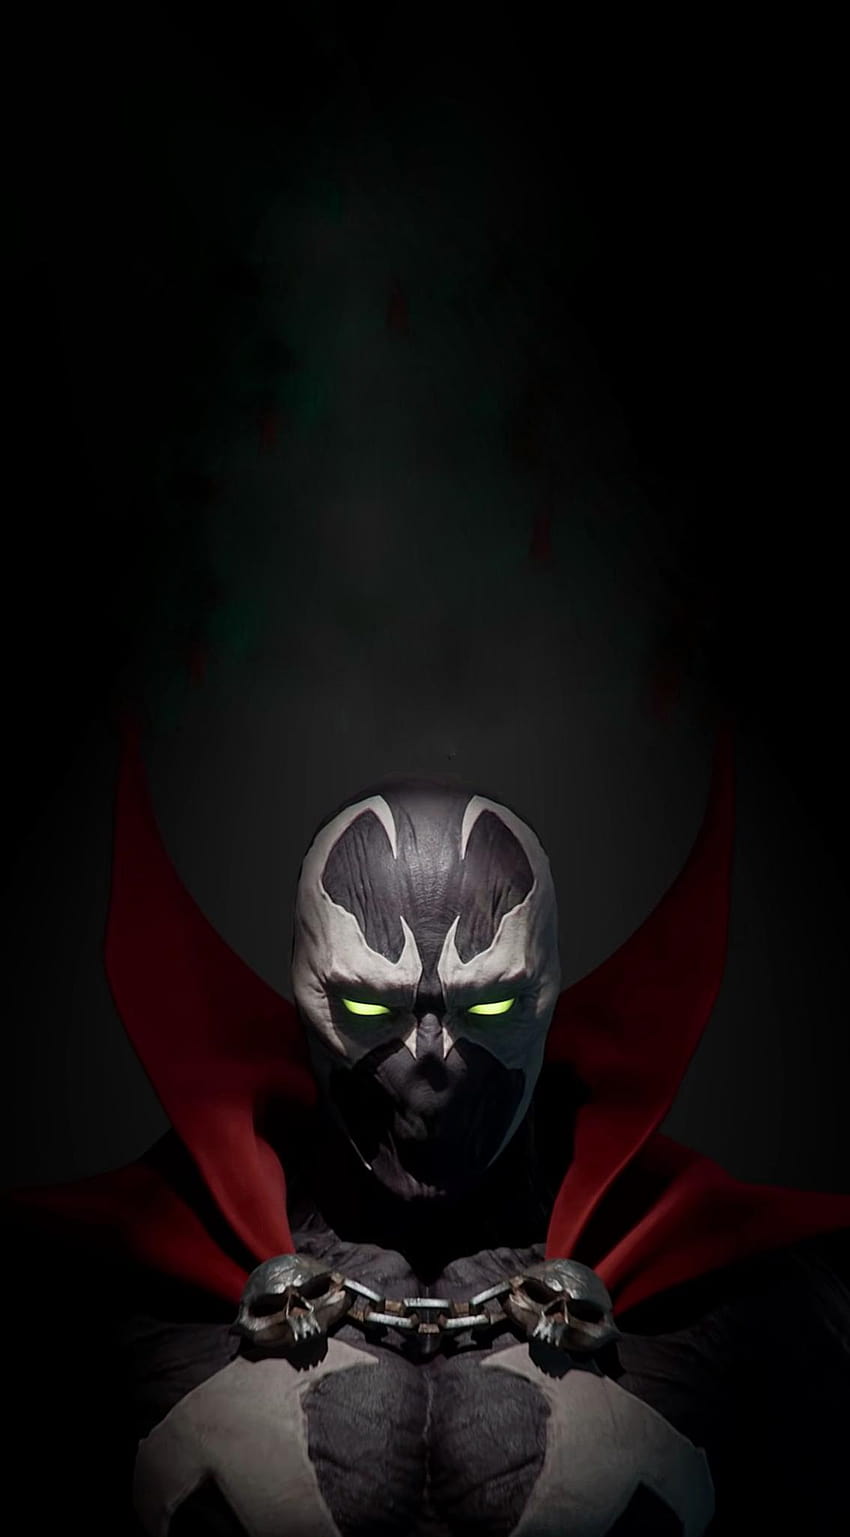 A Spawn that will fit most phone screens : MortalKombat, spawn mobile HD phone wallpaper